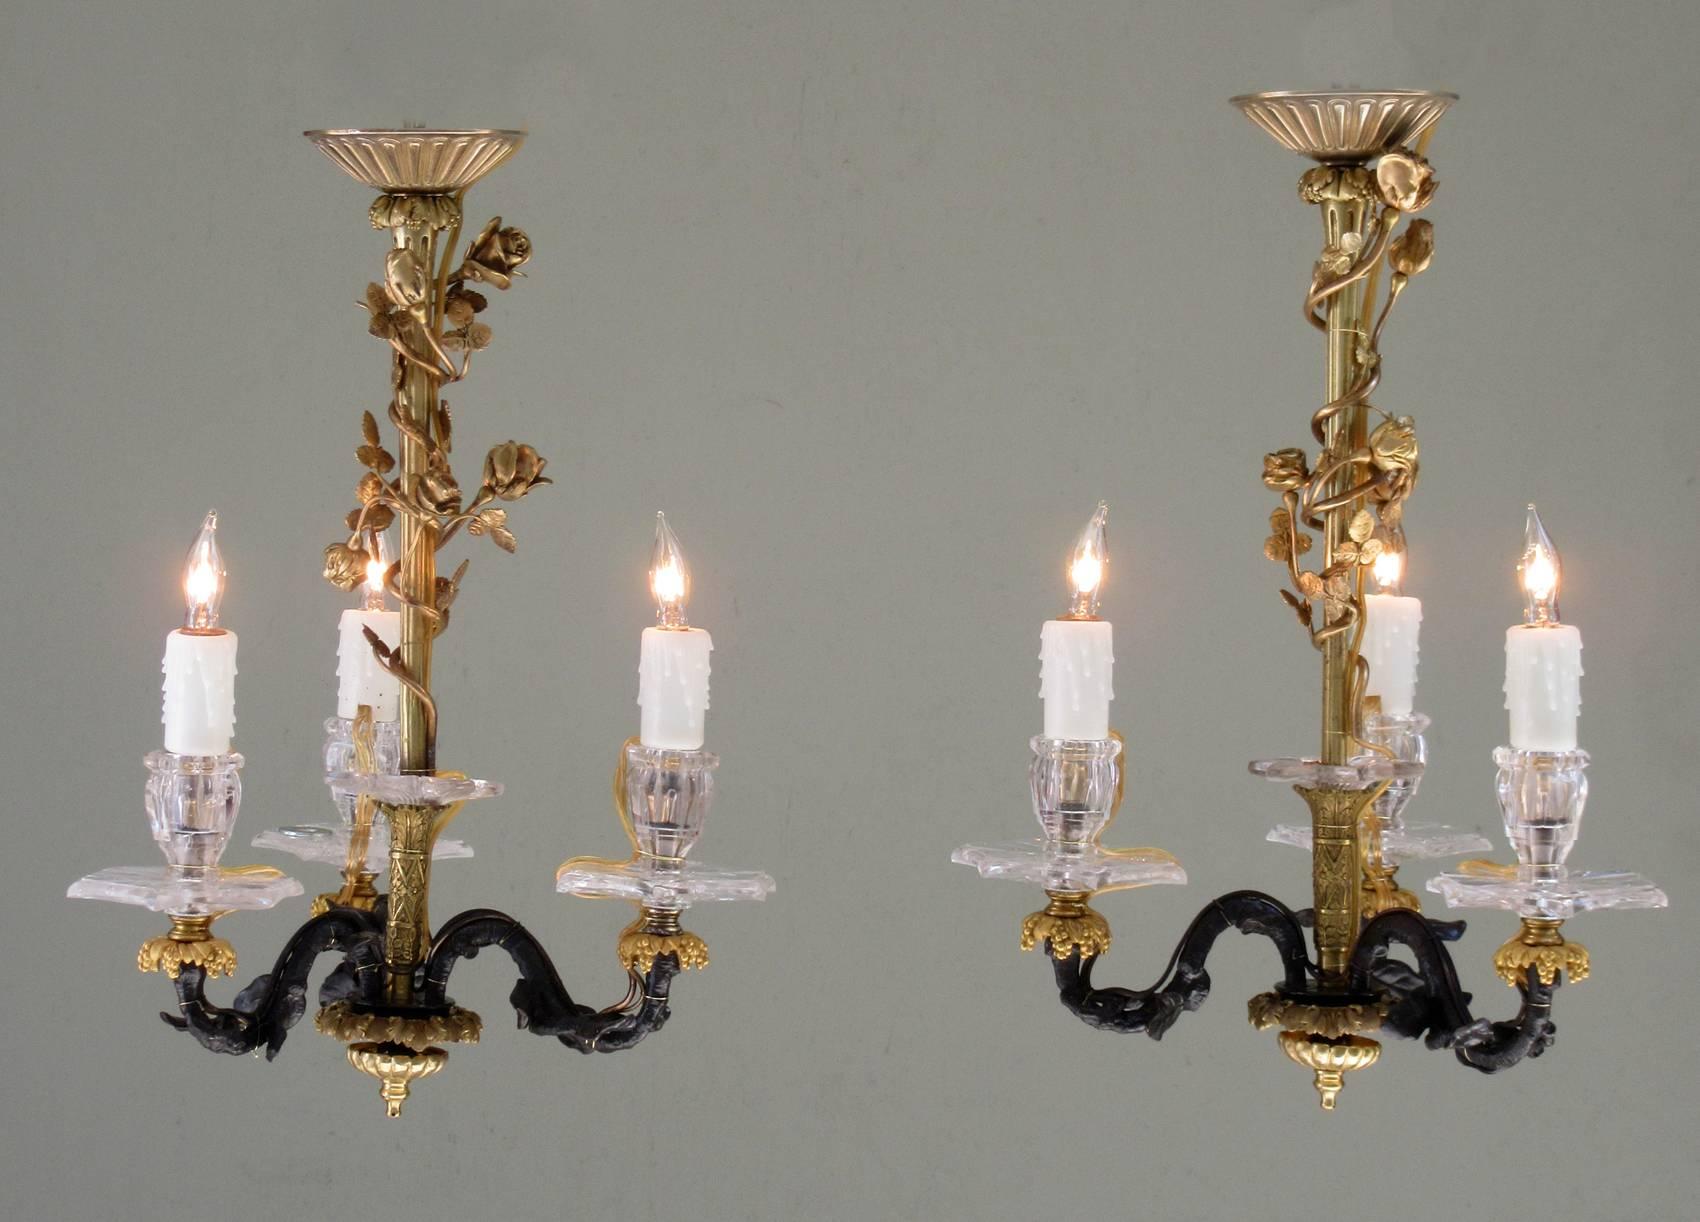 A diminutive pair of late 19th century French Louis XIV patinated bronze and bronze doré chandeliers, circa 1880, with polished rock crystal candle holders with bobeche. The chandeliers have been rewired with new porcelain sockets.